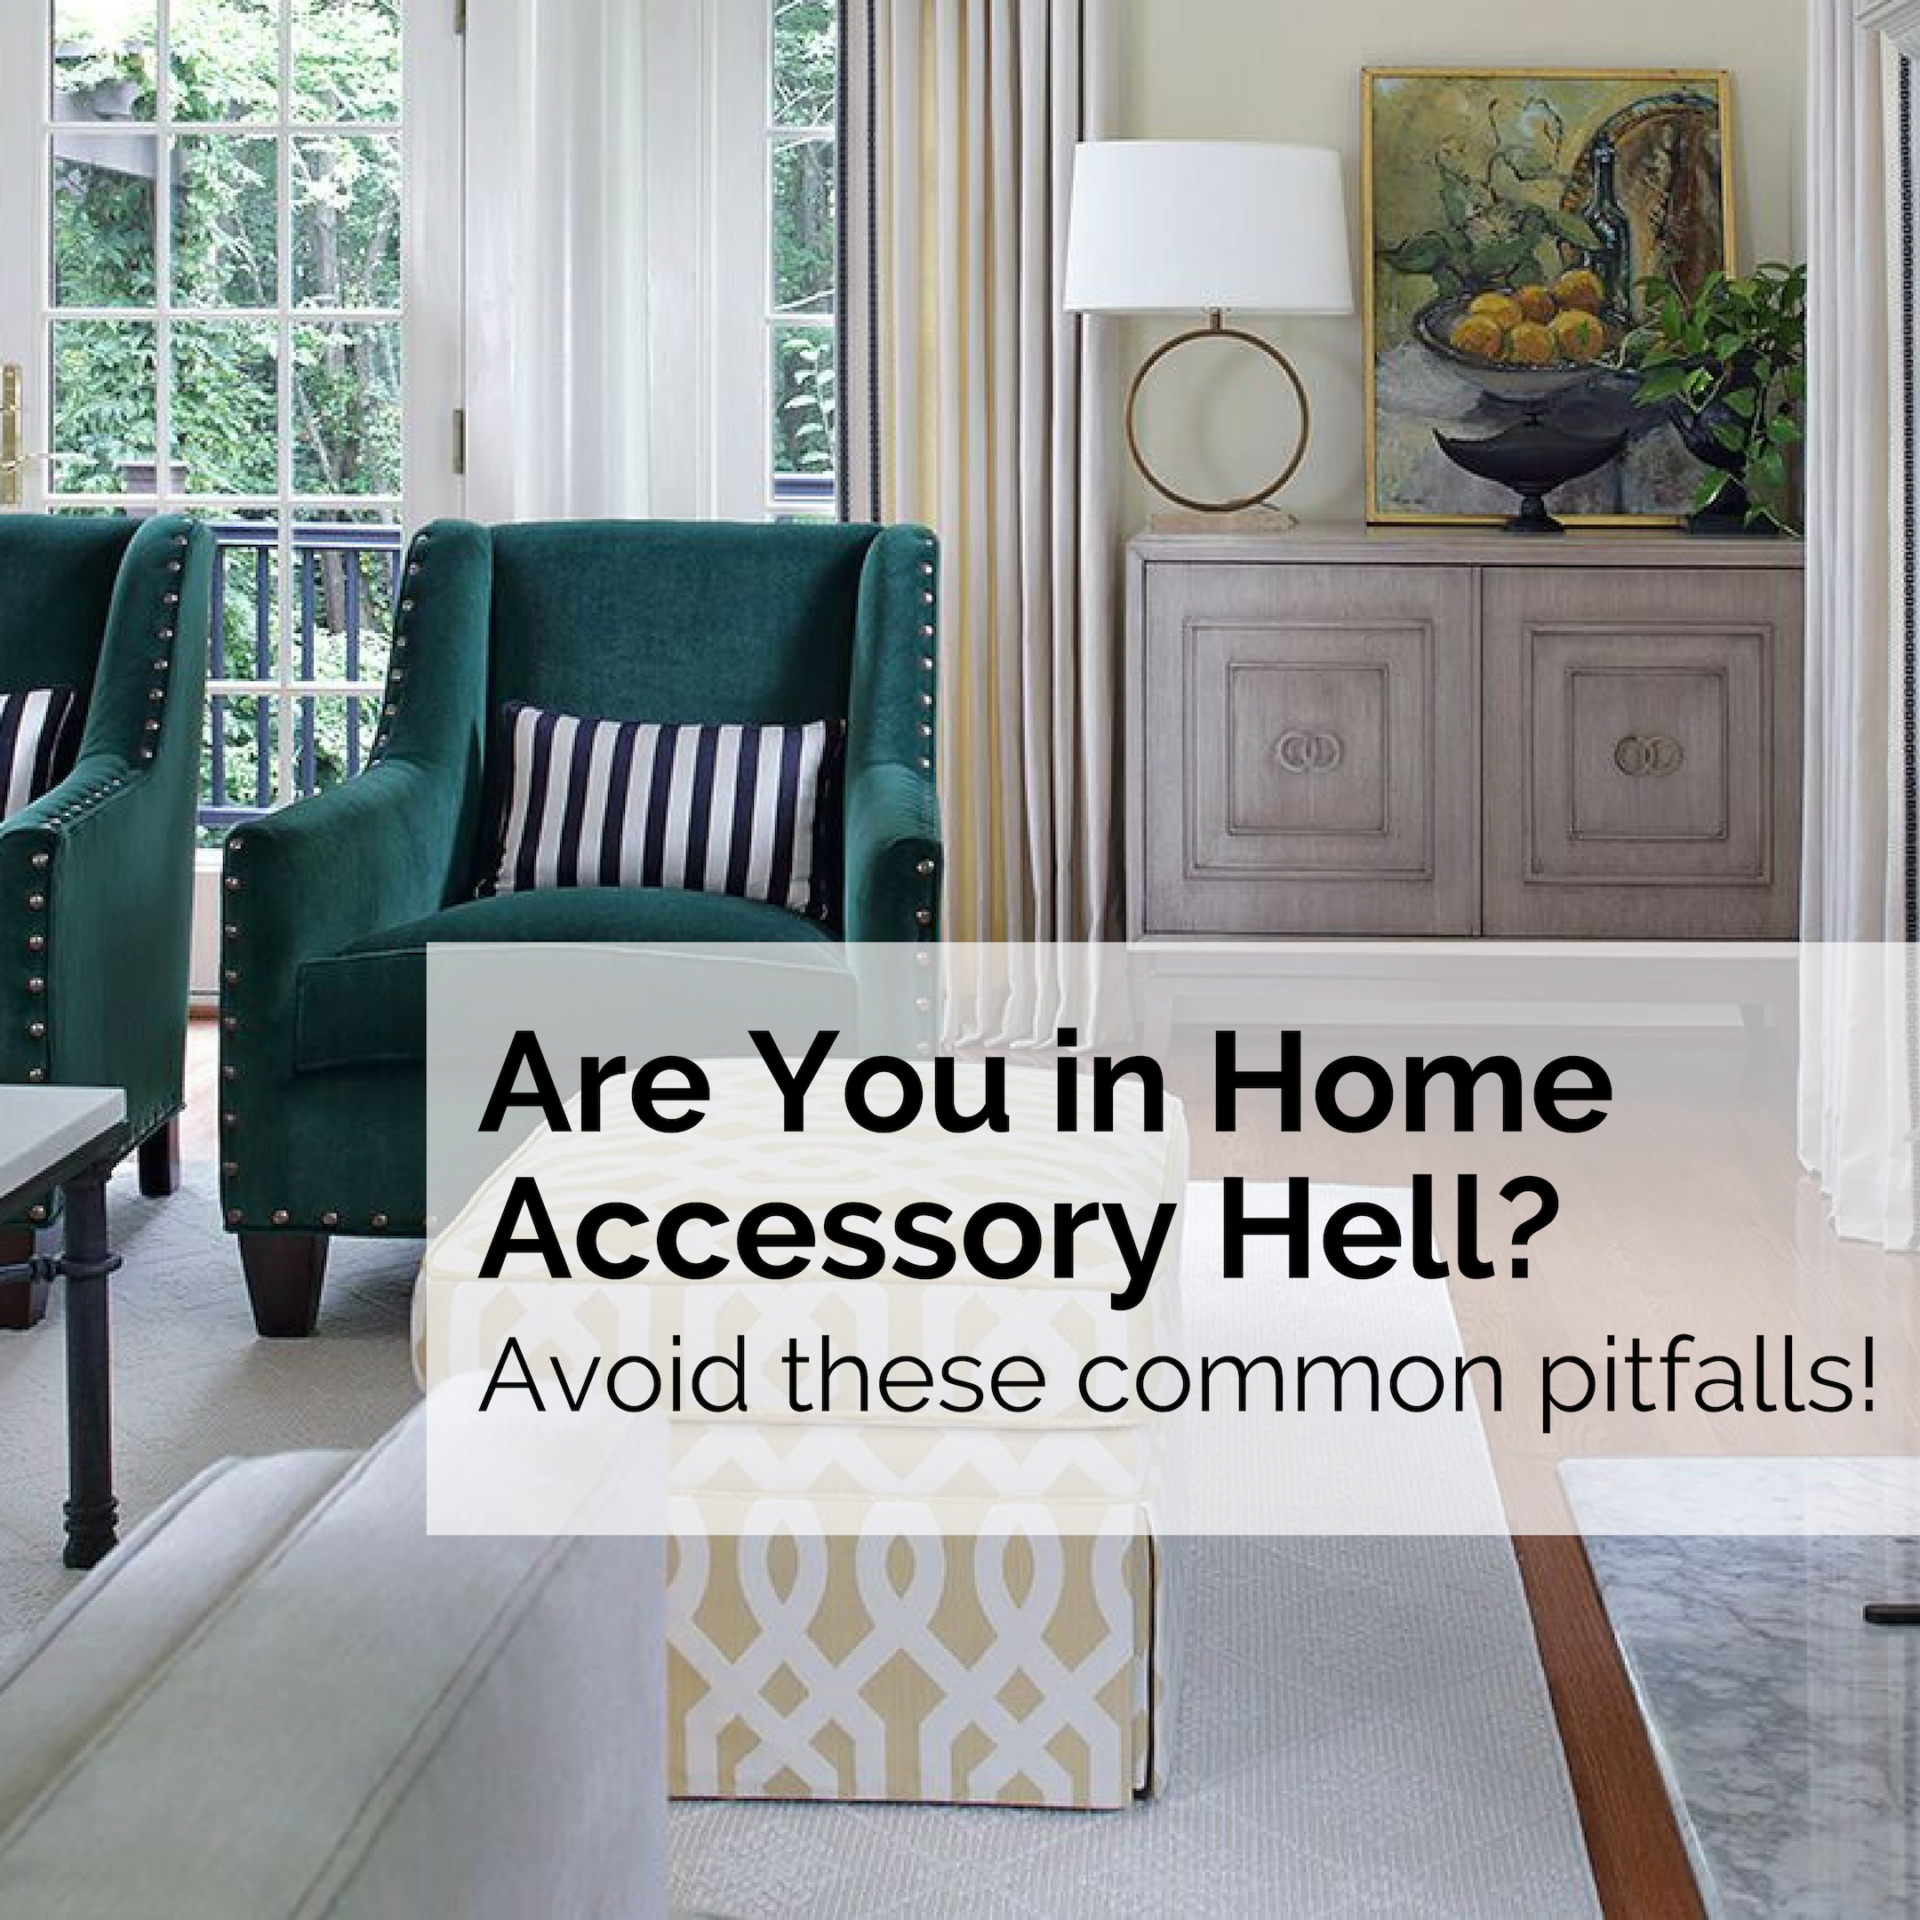 Are You In Home Accessory Hell? Avoid These Pitfalls!